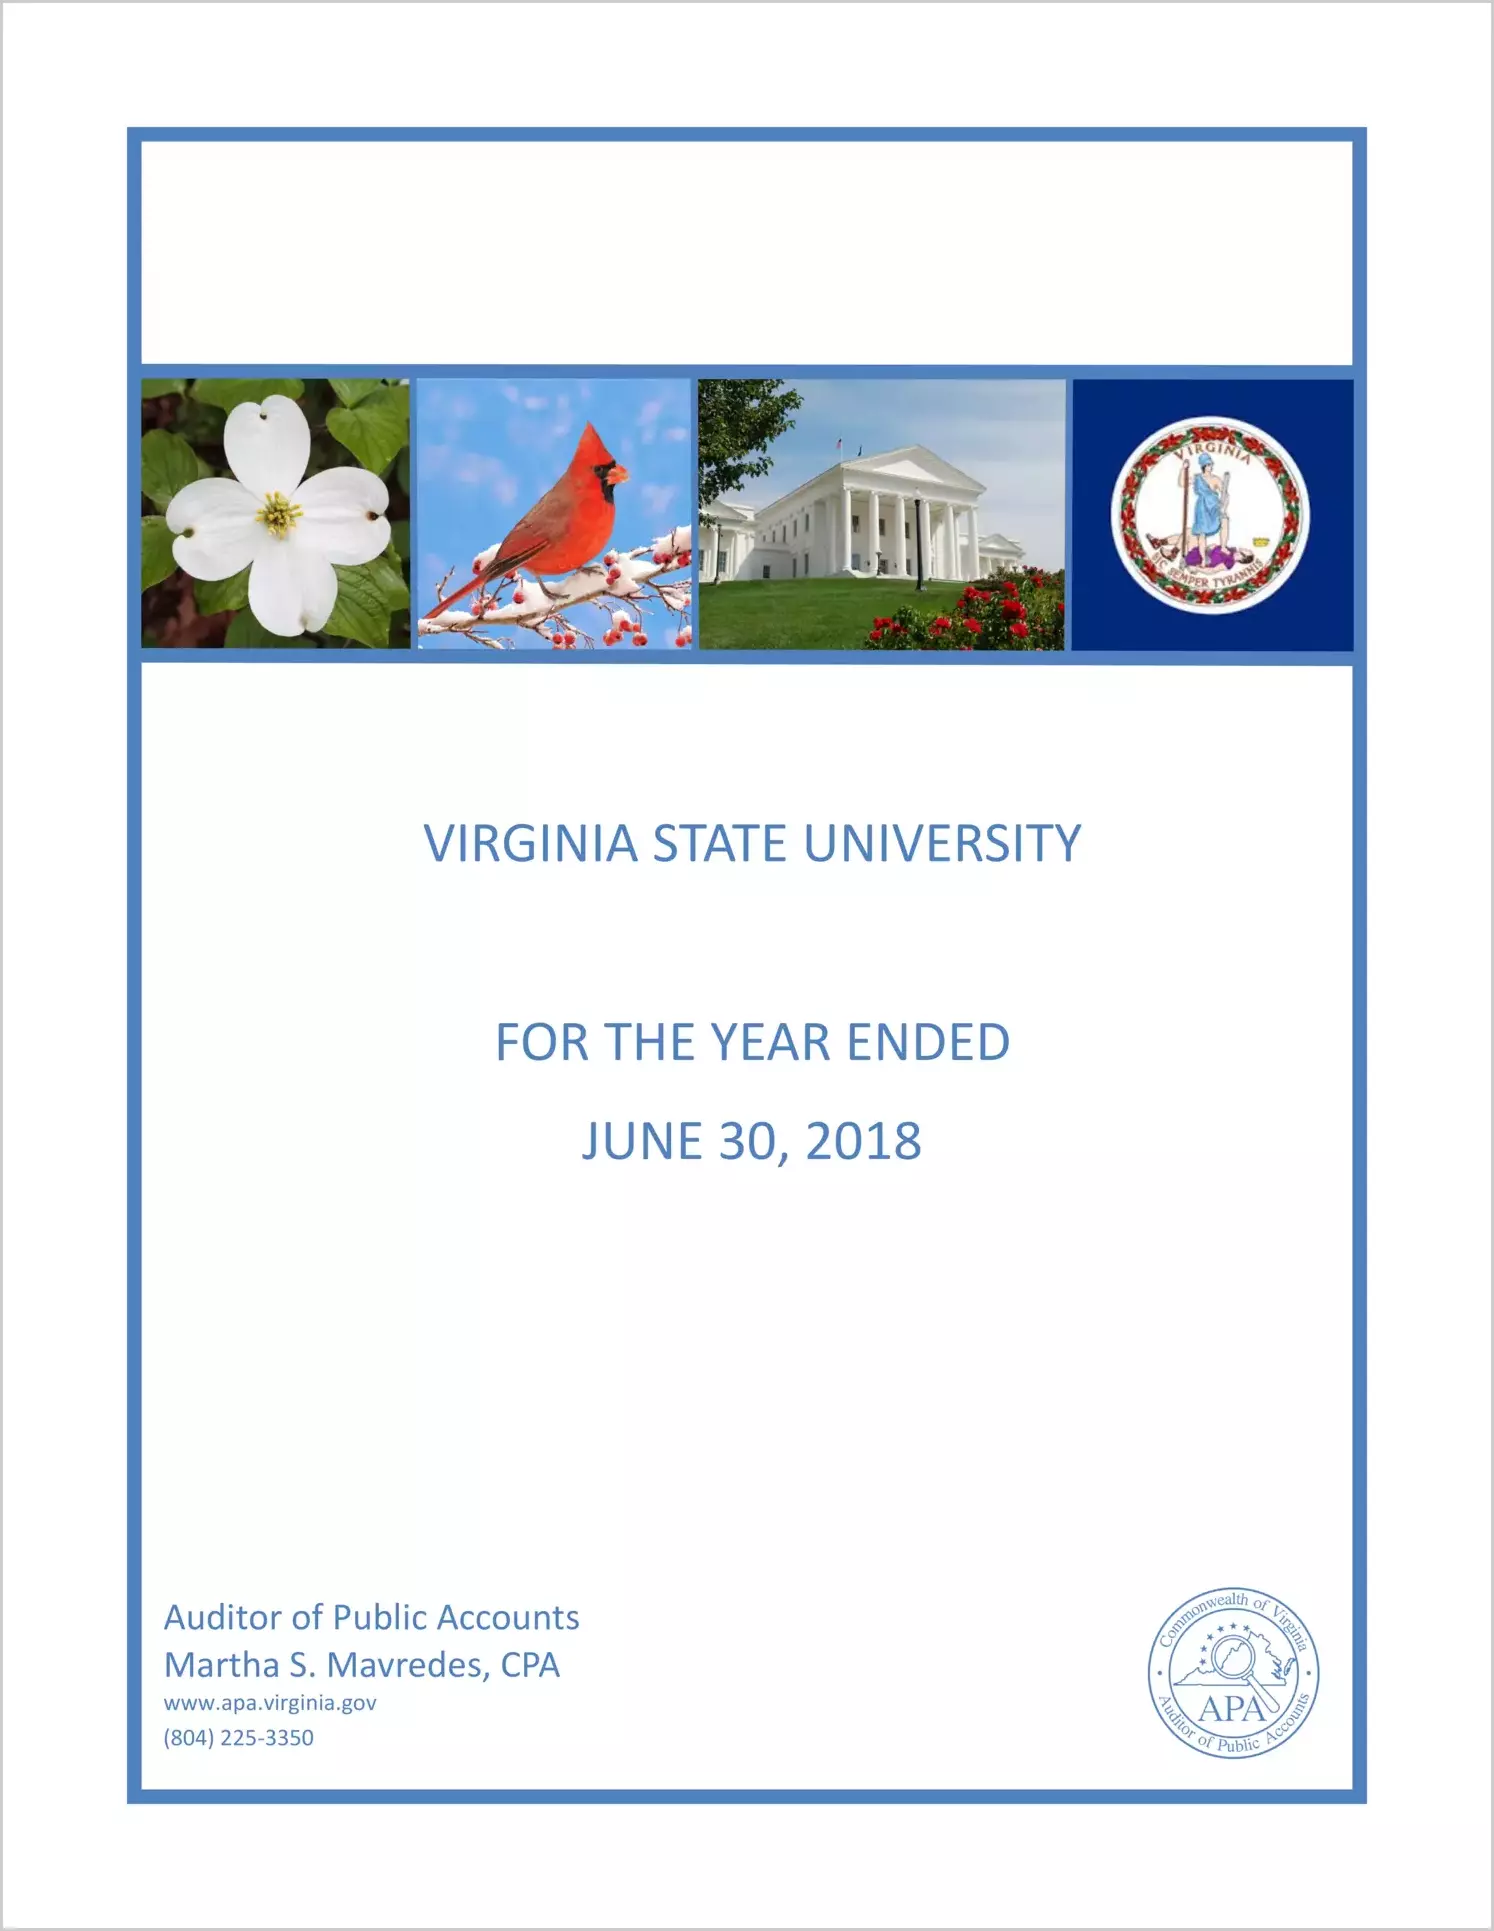 Virginia State University for the year ended June 30, 2018